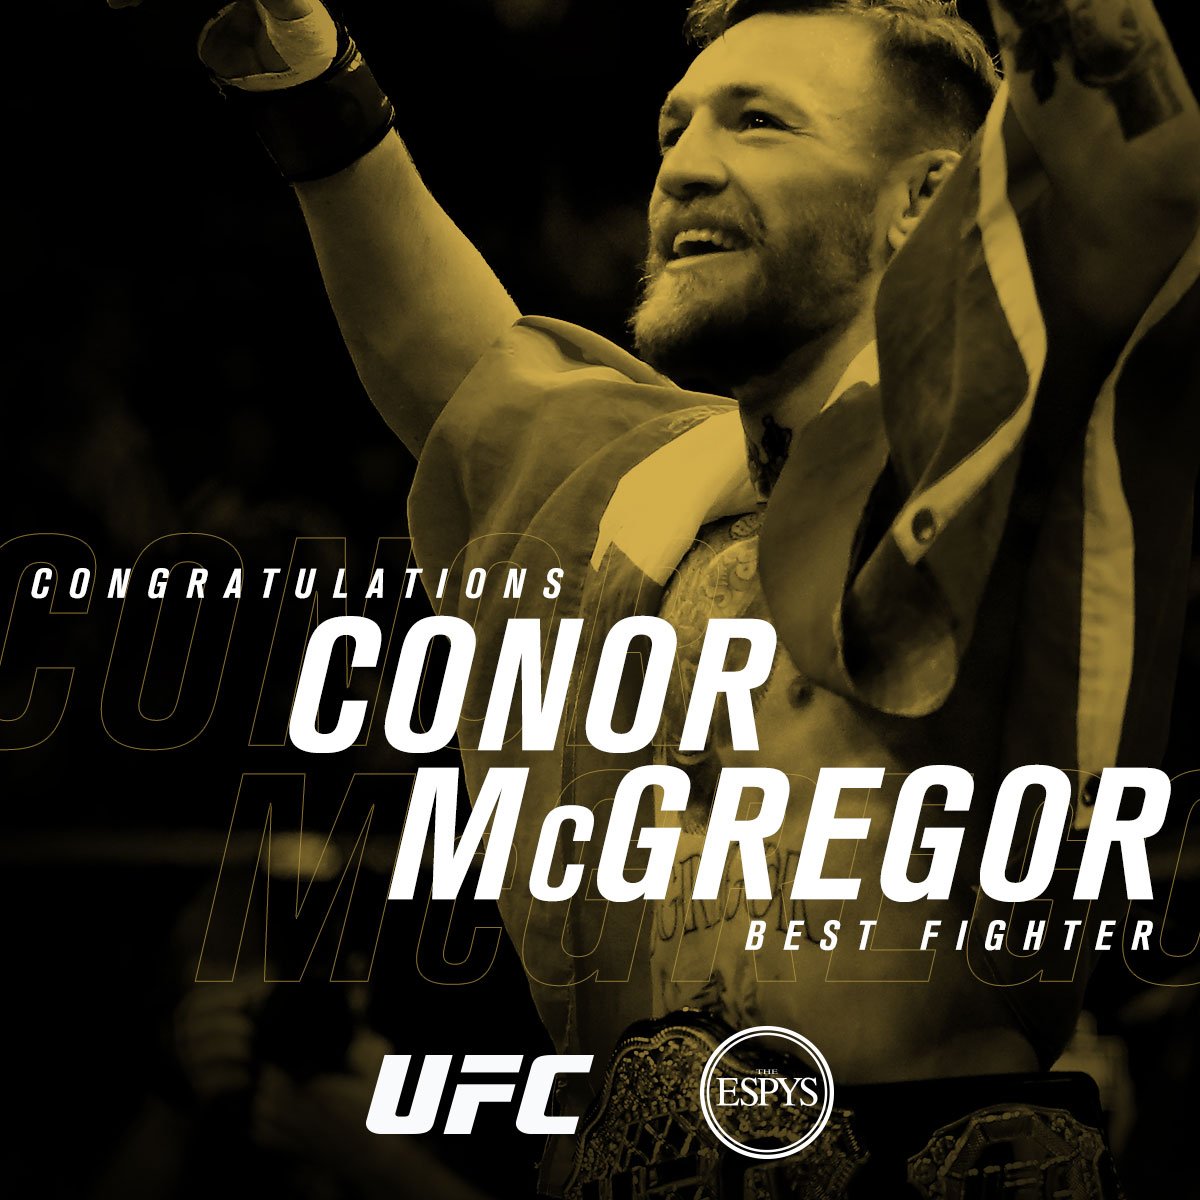 RT @ufc: Congrats @TheNotoriousMMA on your #BestFighter @ESPYS! See you at #UFC202 in Las Vegas! #ESPYS https://t.co/c5uMfSHabq